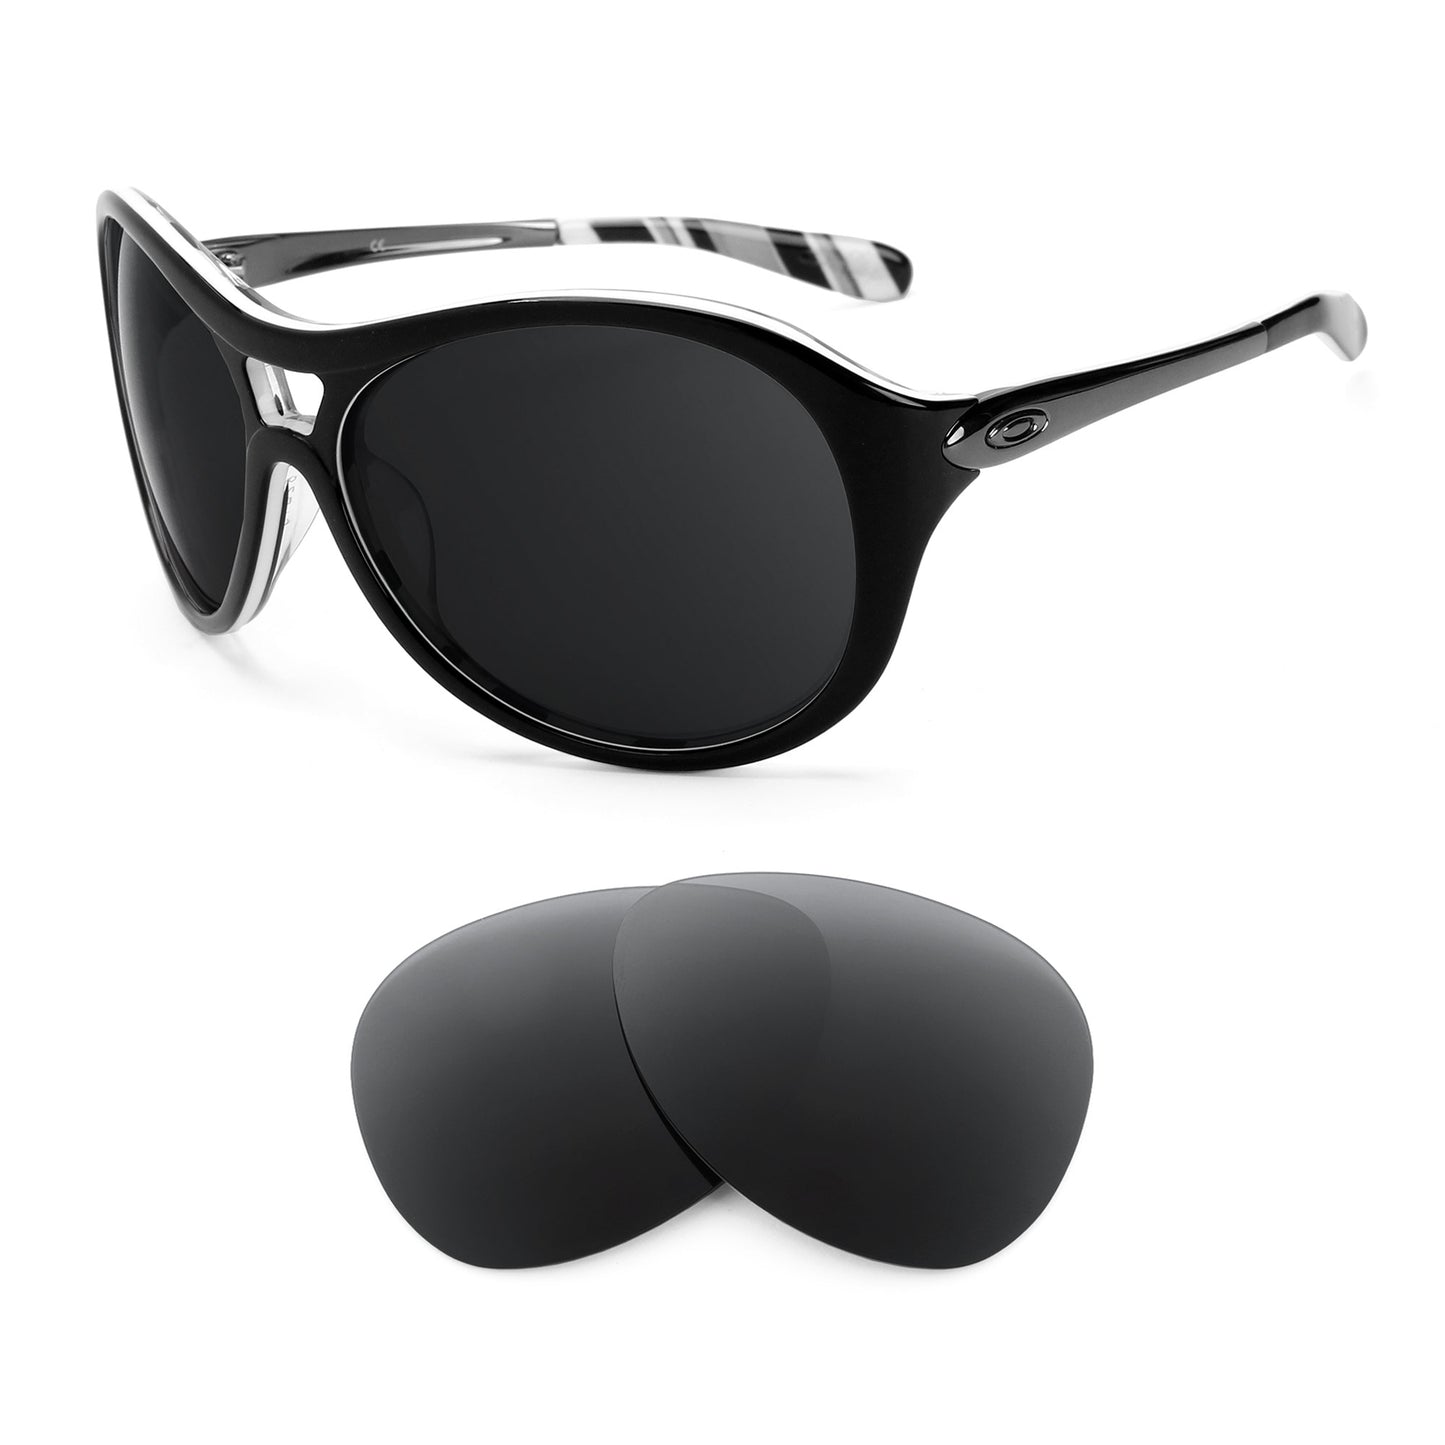 Oakley Vacancy sunglasses with replacement lenses